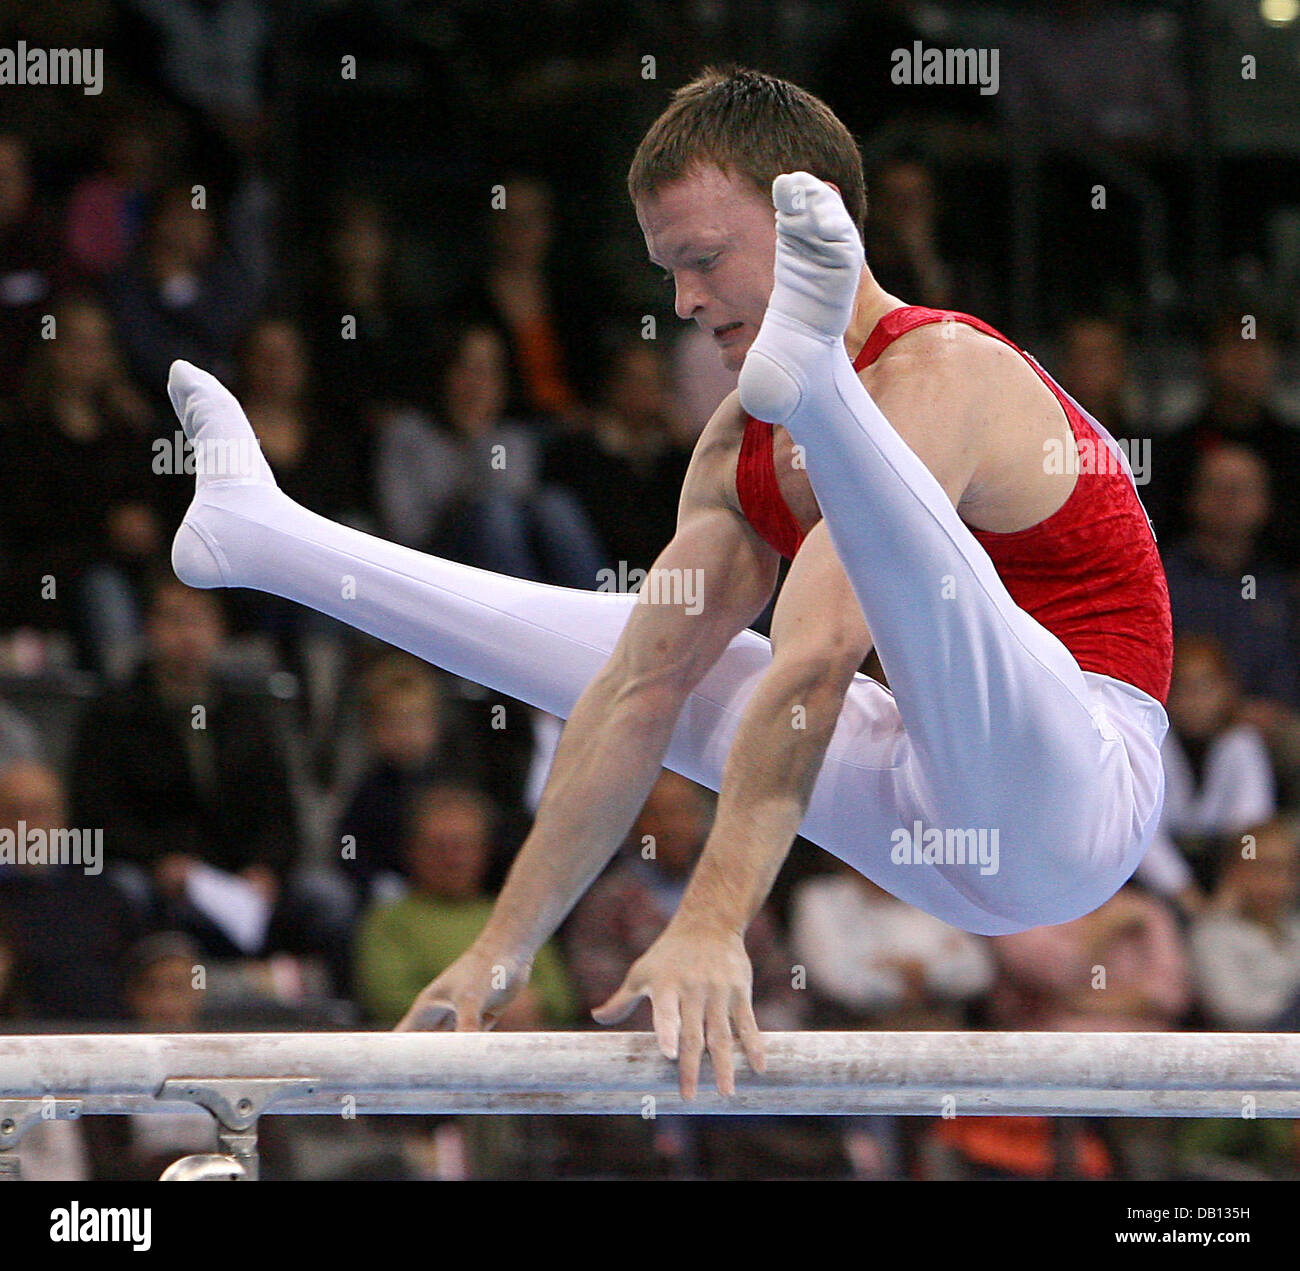 Uzbek Anton Fokin in action at the 25th DTB Cup in Stuttgart, Germany, 27 October 2007. Fokin finished second in the bars competition with 15.850 points. Photo: NORBERT FOERSTERLING Stock Photo